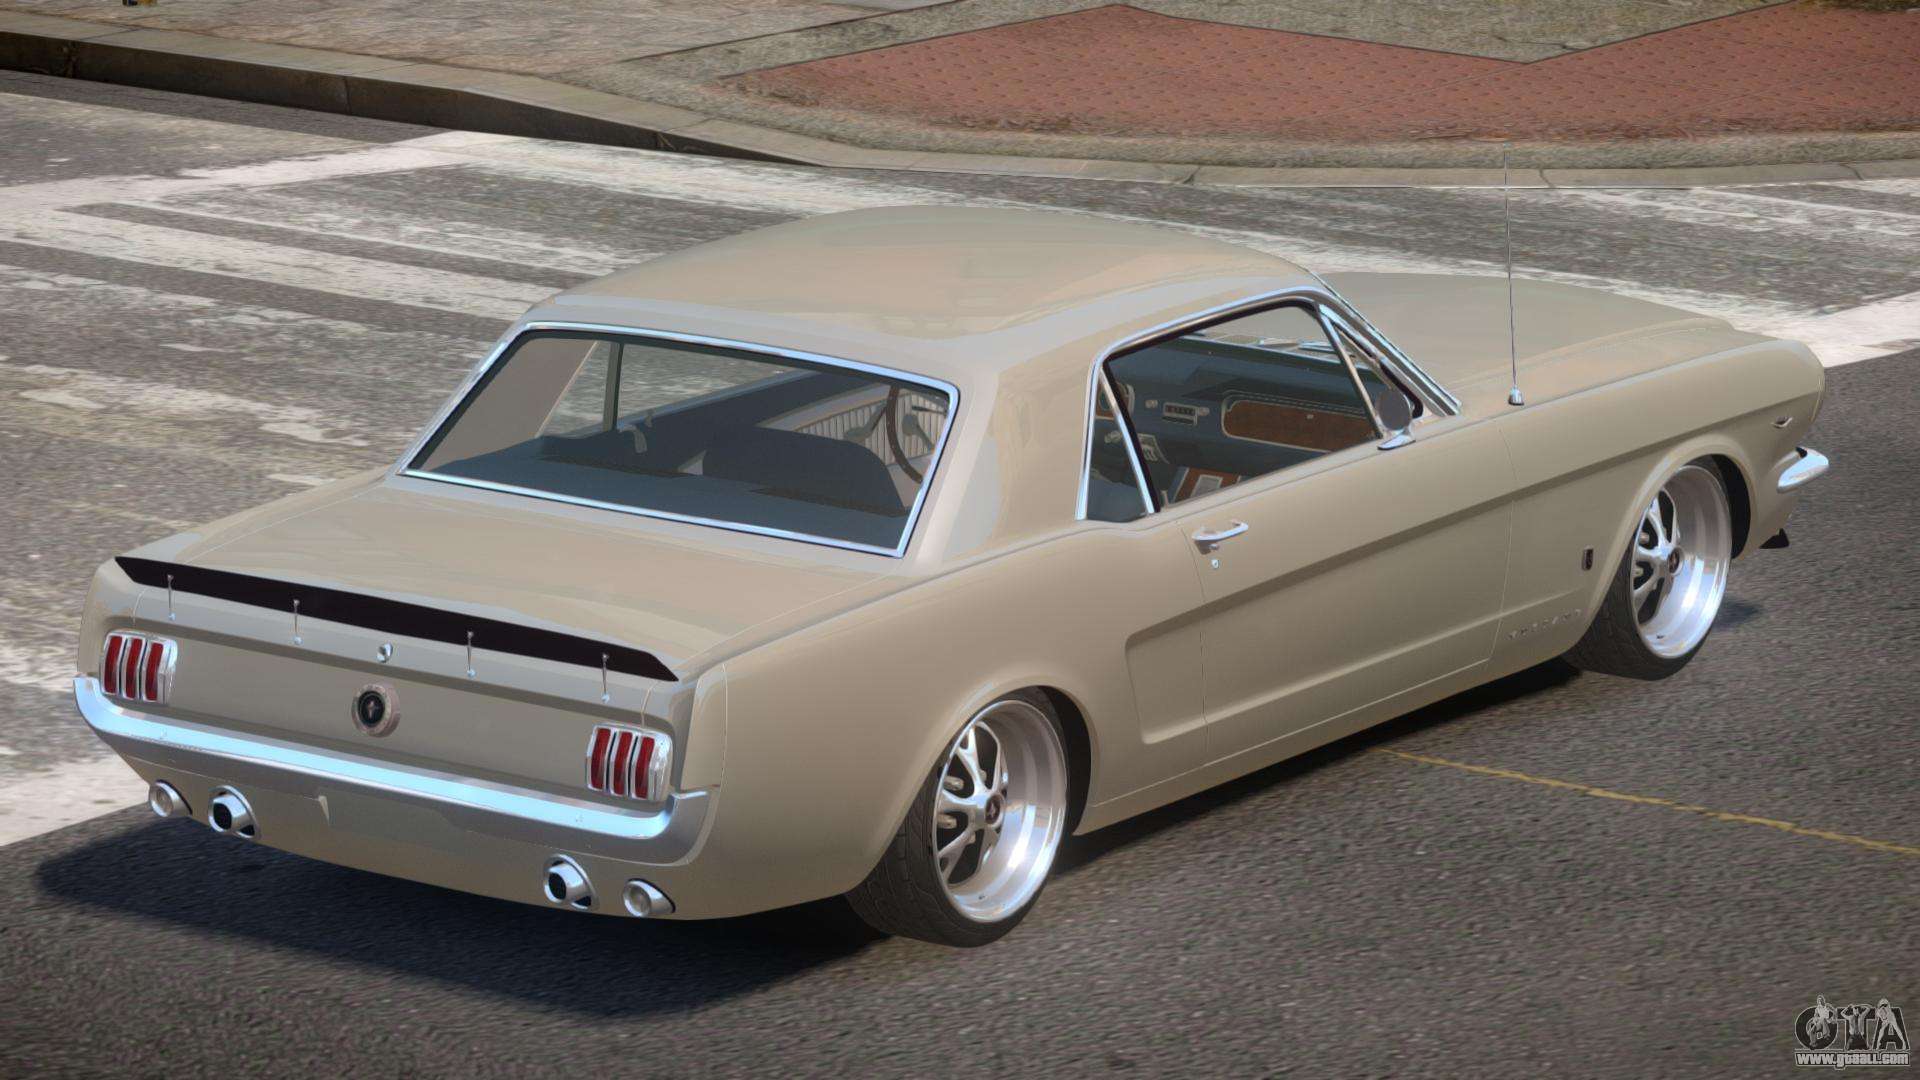 Ford Mustang 1963 Images
